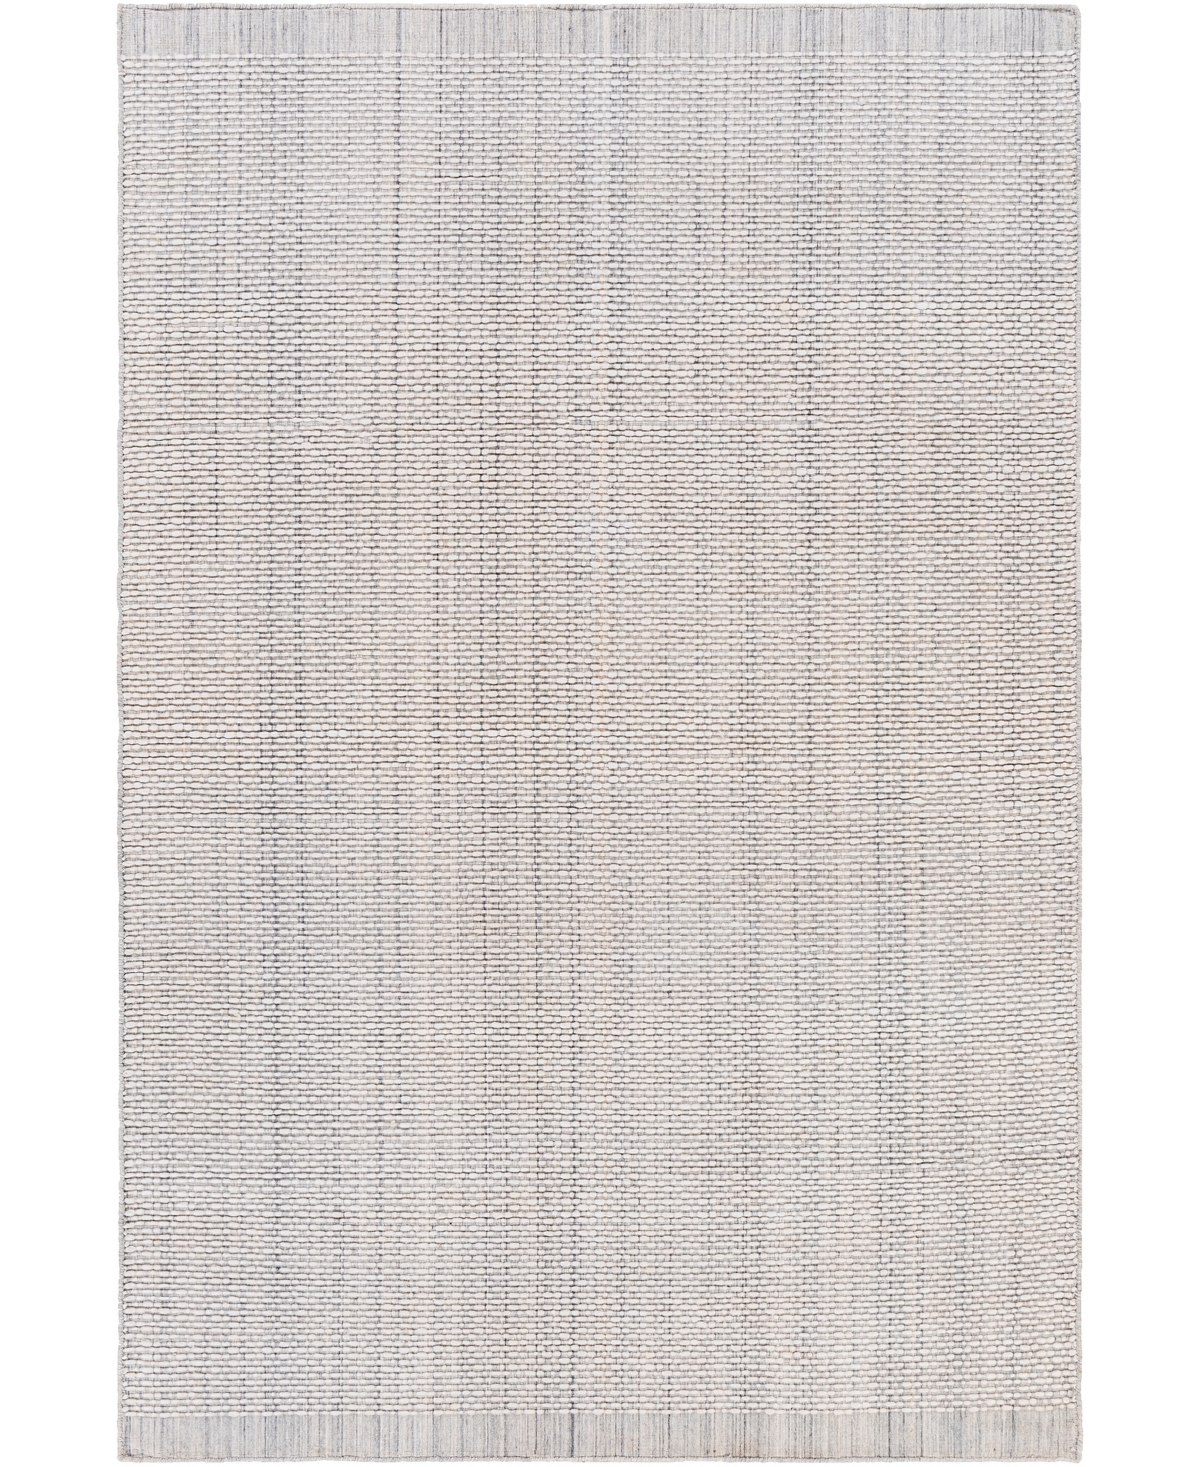 Surya Sycamore Syc-2300 6in x 9' Outdoor Area Rug - White, Gray